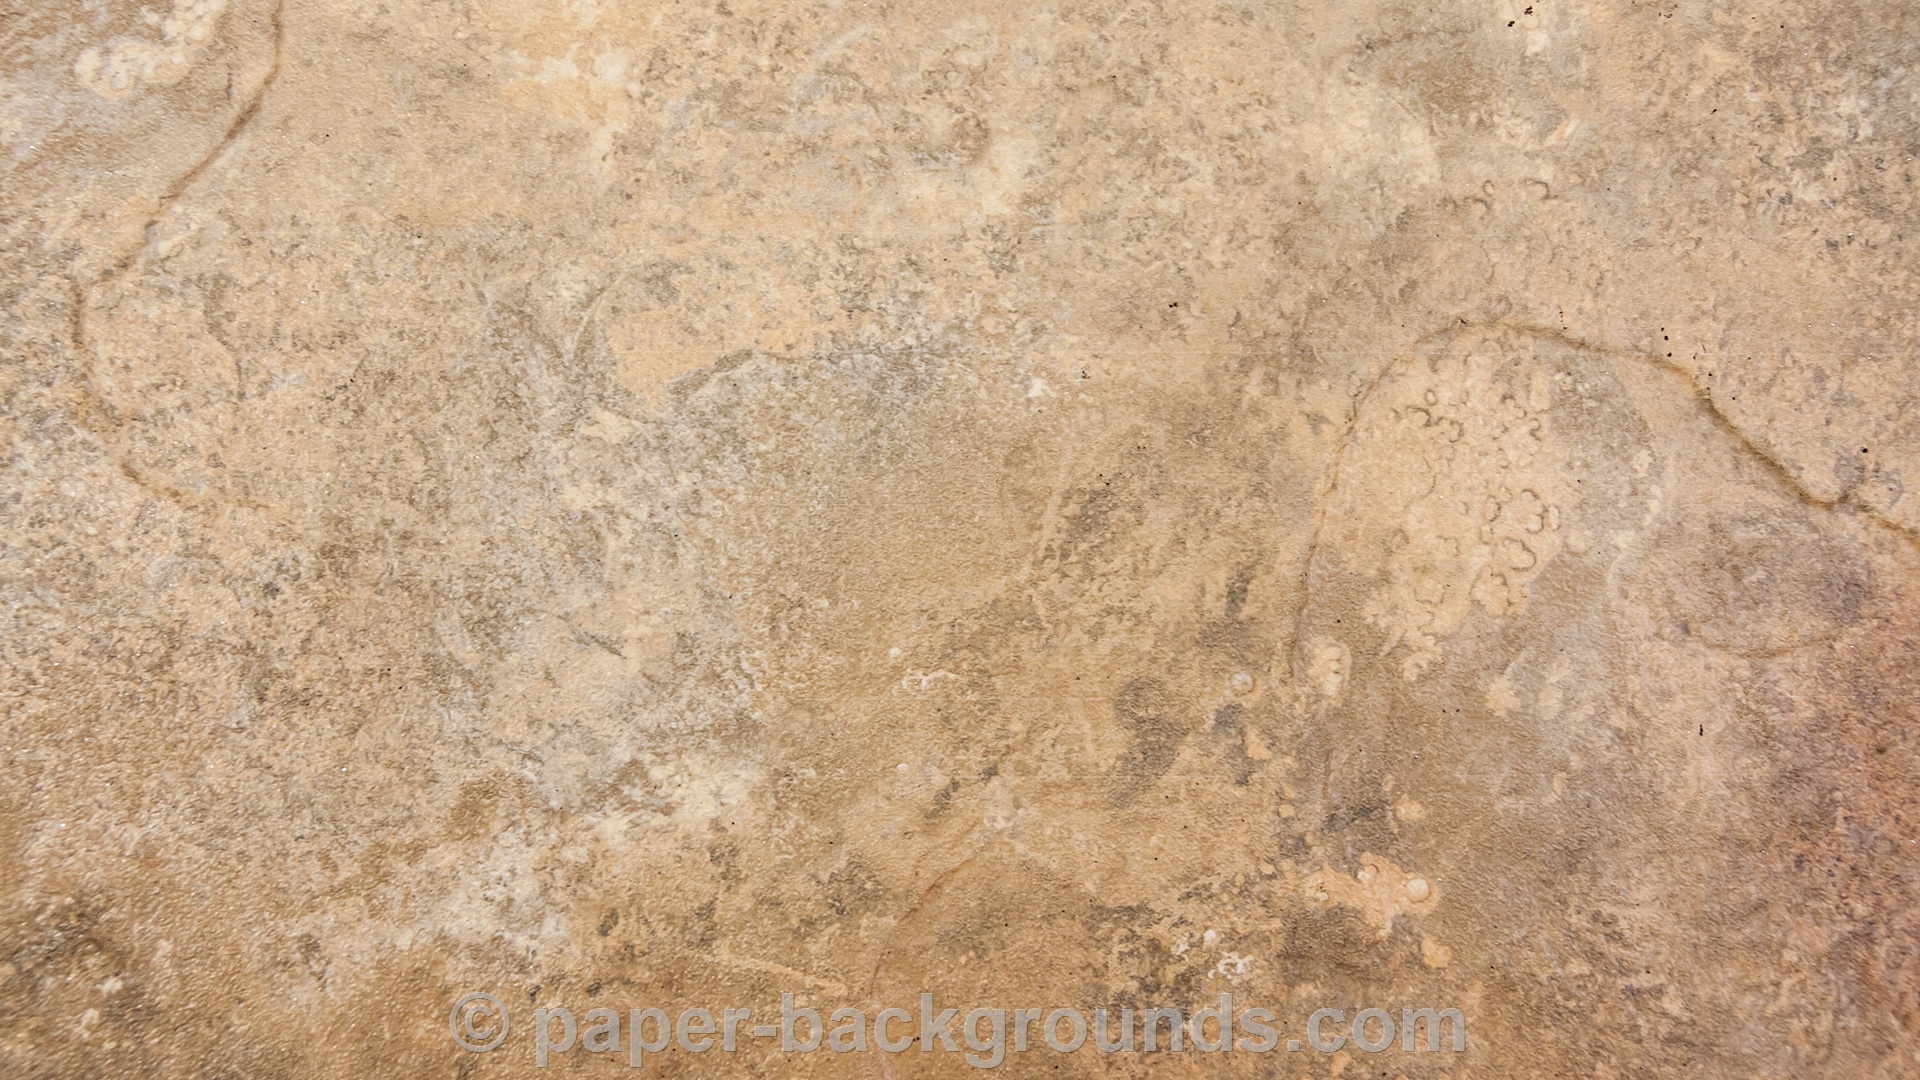 Brown Marble Texture Background HD Paper Backgrounds